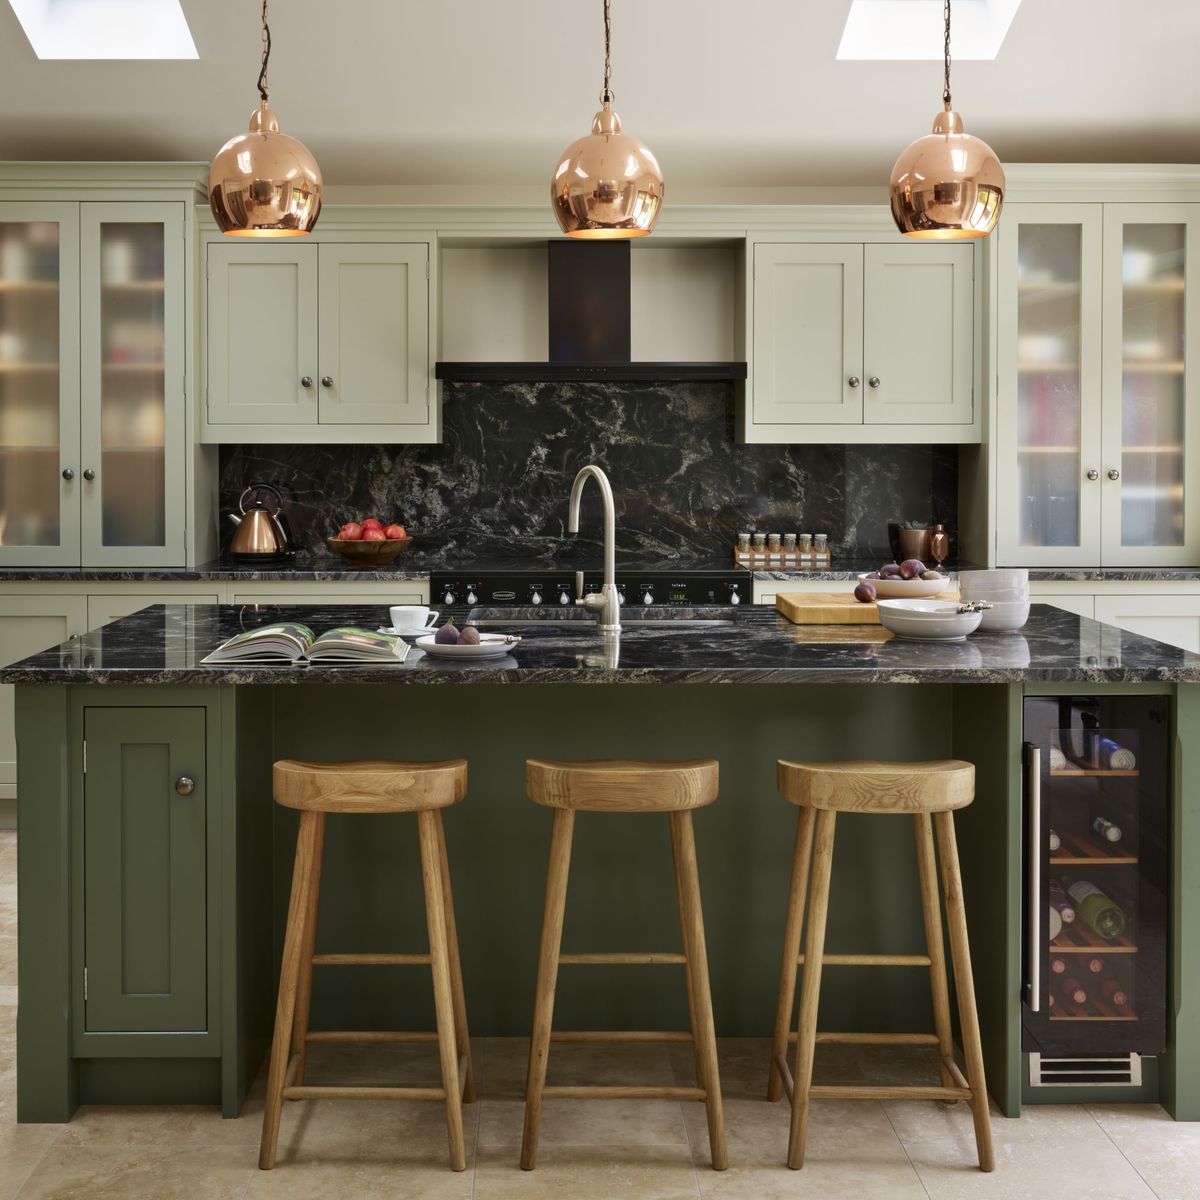 Farm house chic: Sage green kitchen with wood look porcelain floor